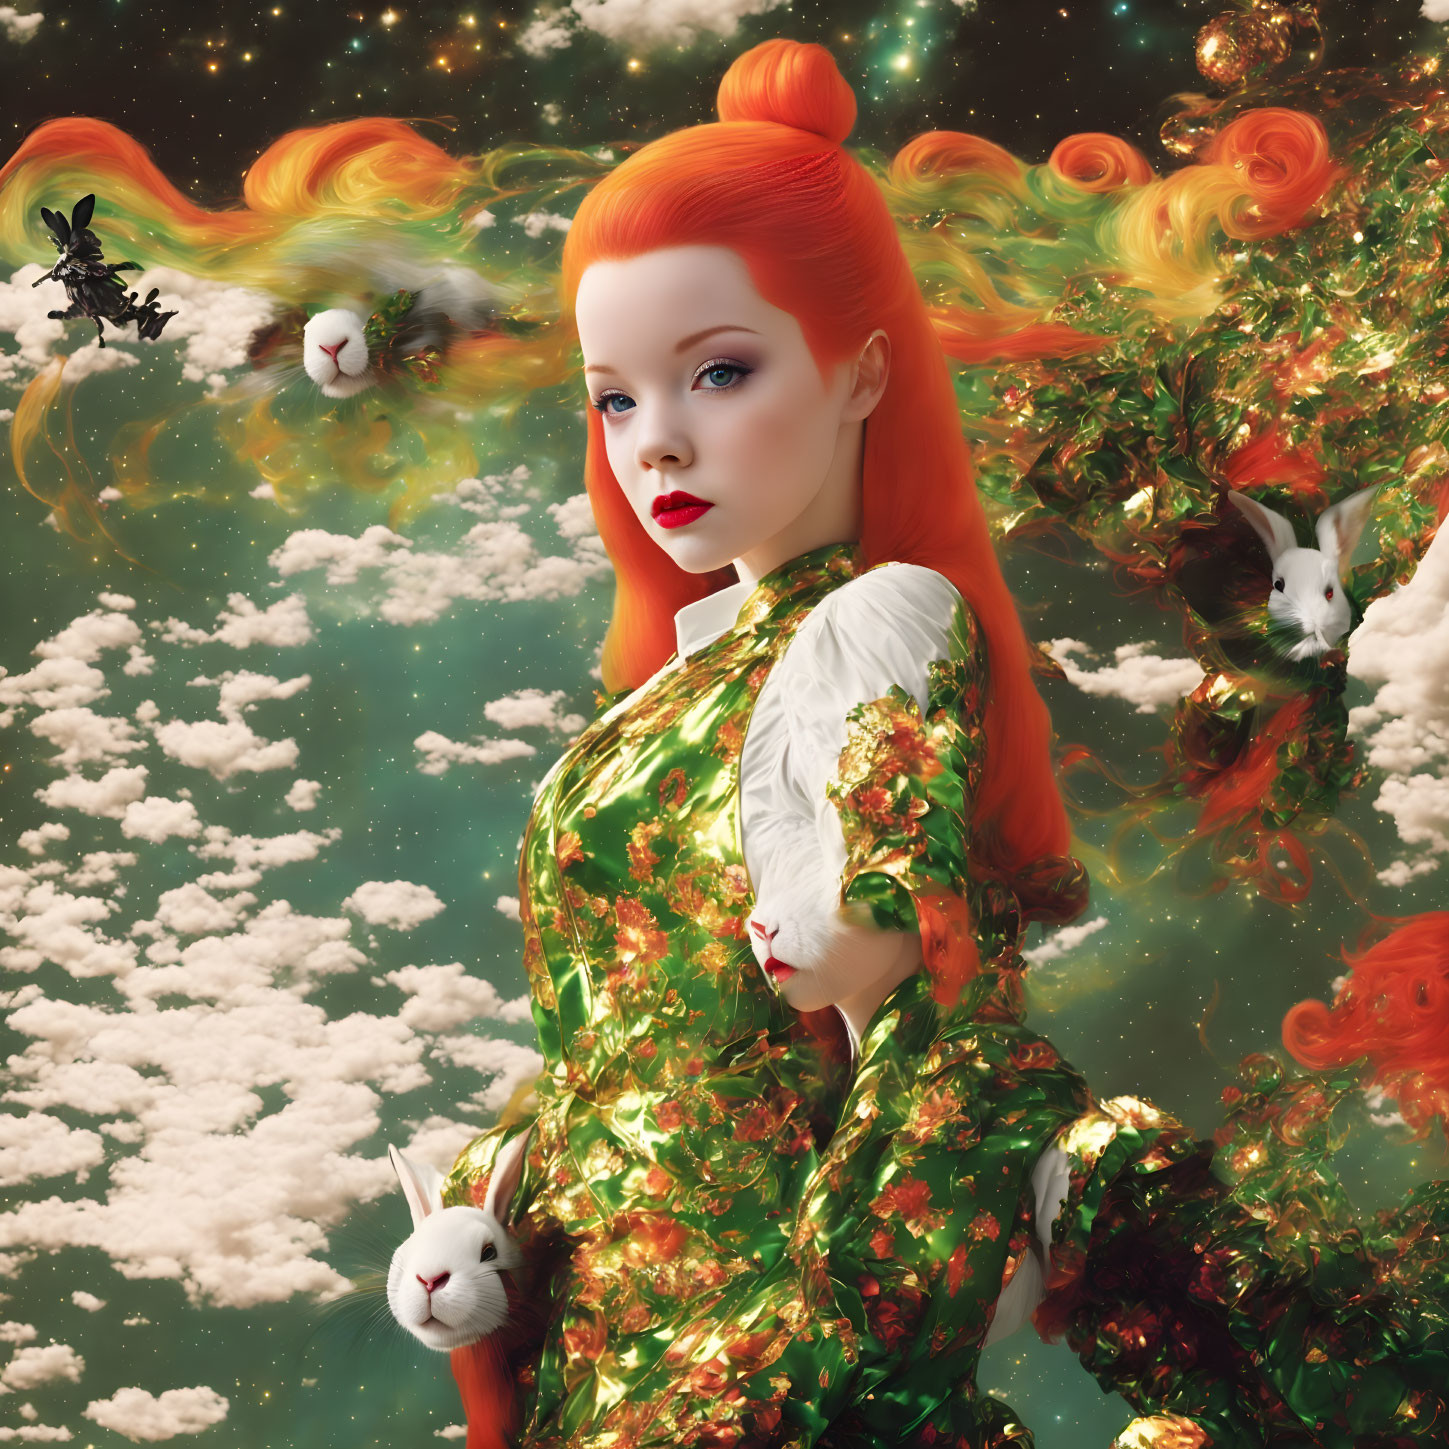 Vivid surreal artwork: woman with red hair, swirling patterns, white rabbits.